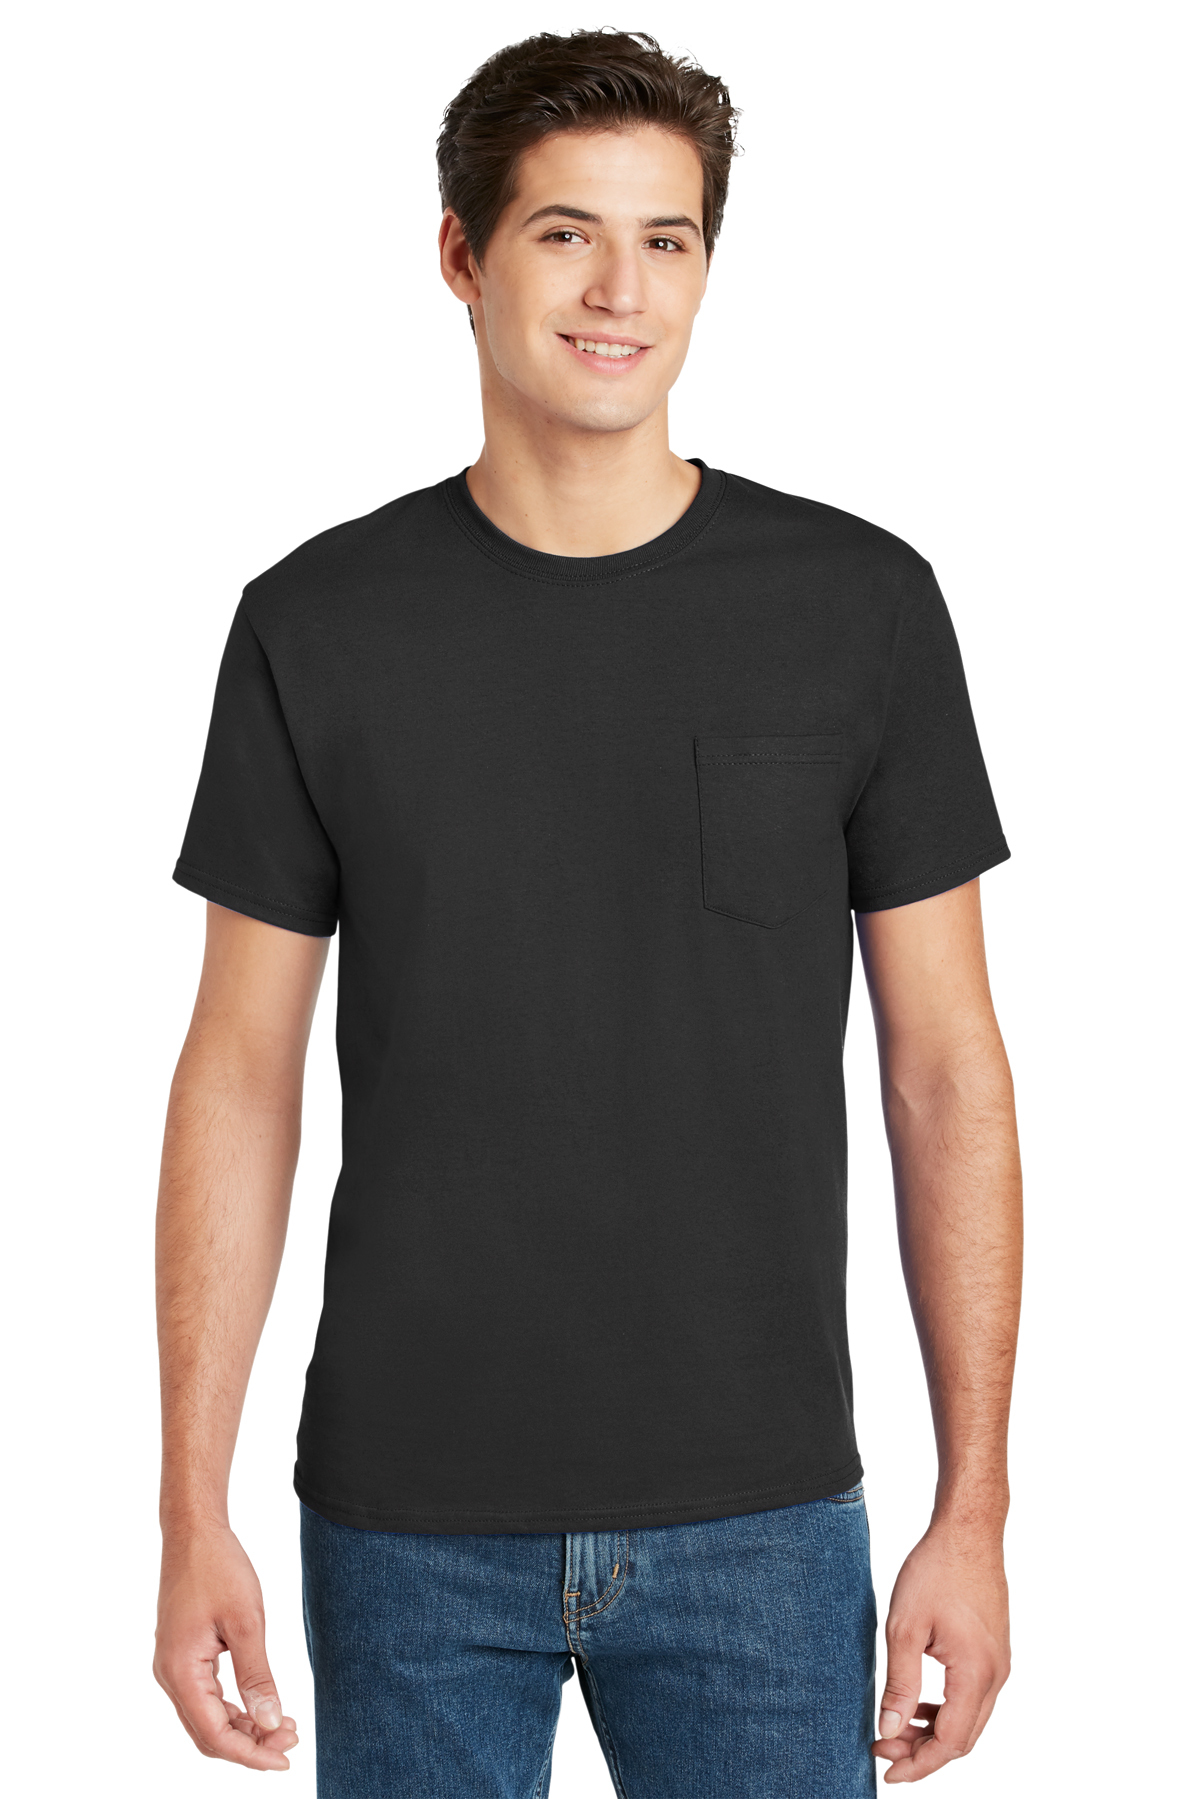 Hanes - 100% Cotton T-Shirt with Pocket | Product | SanMar